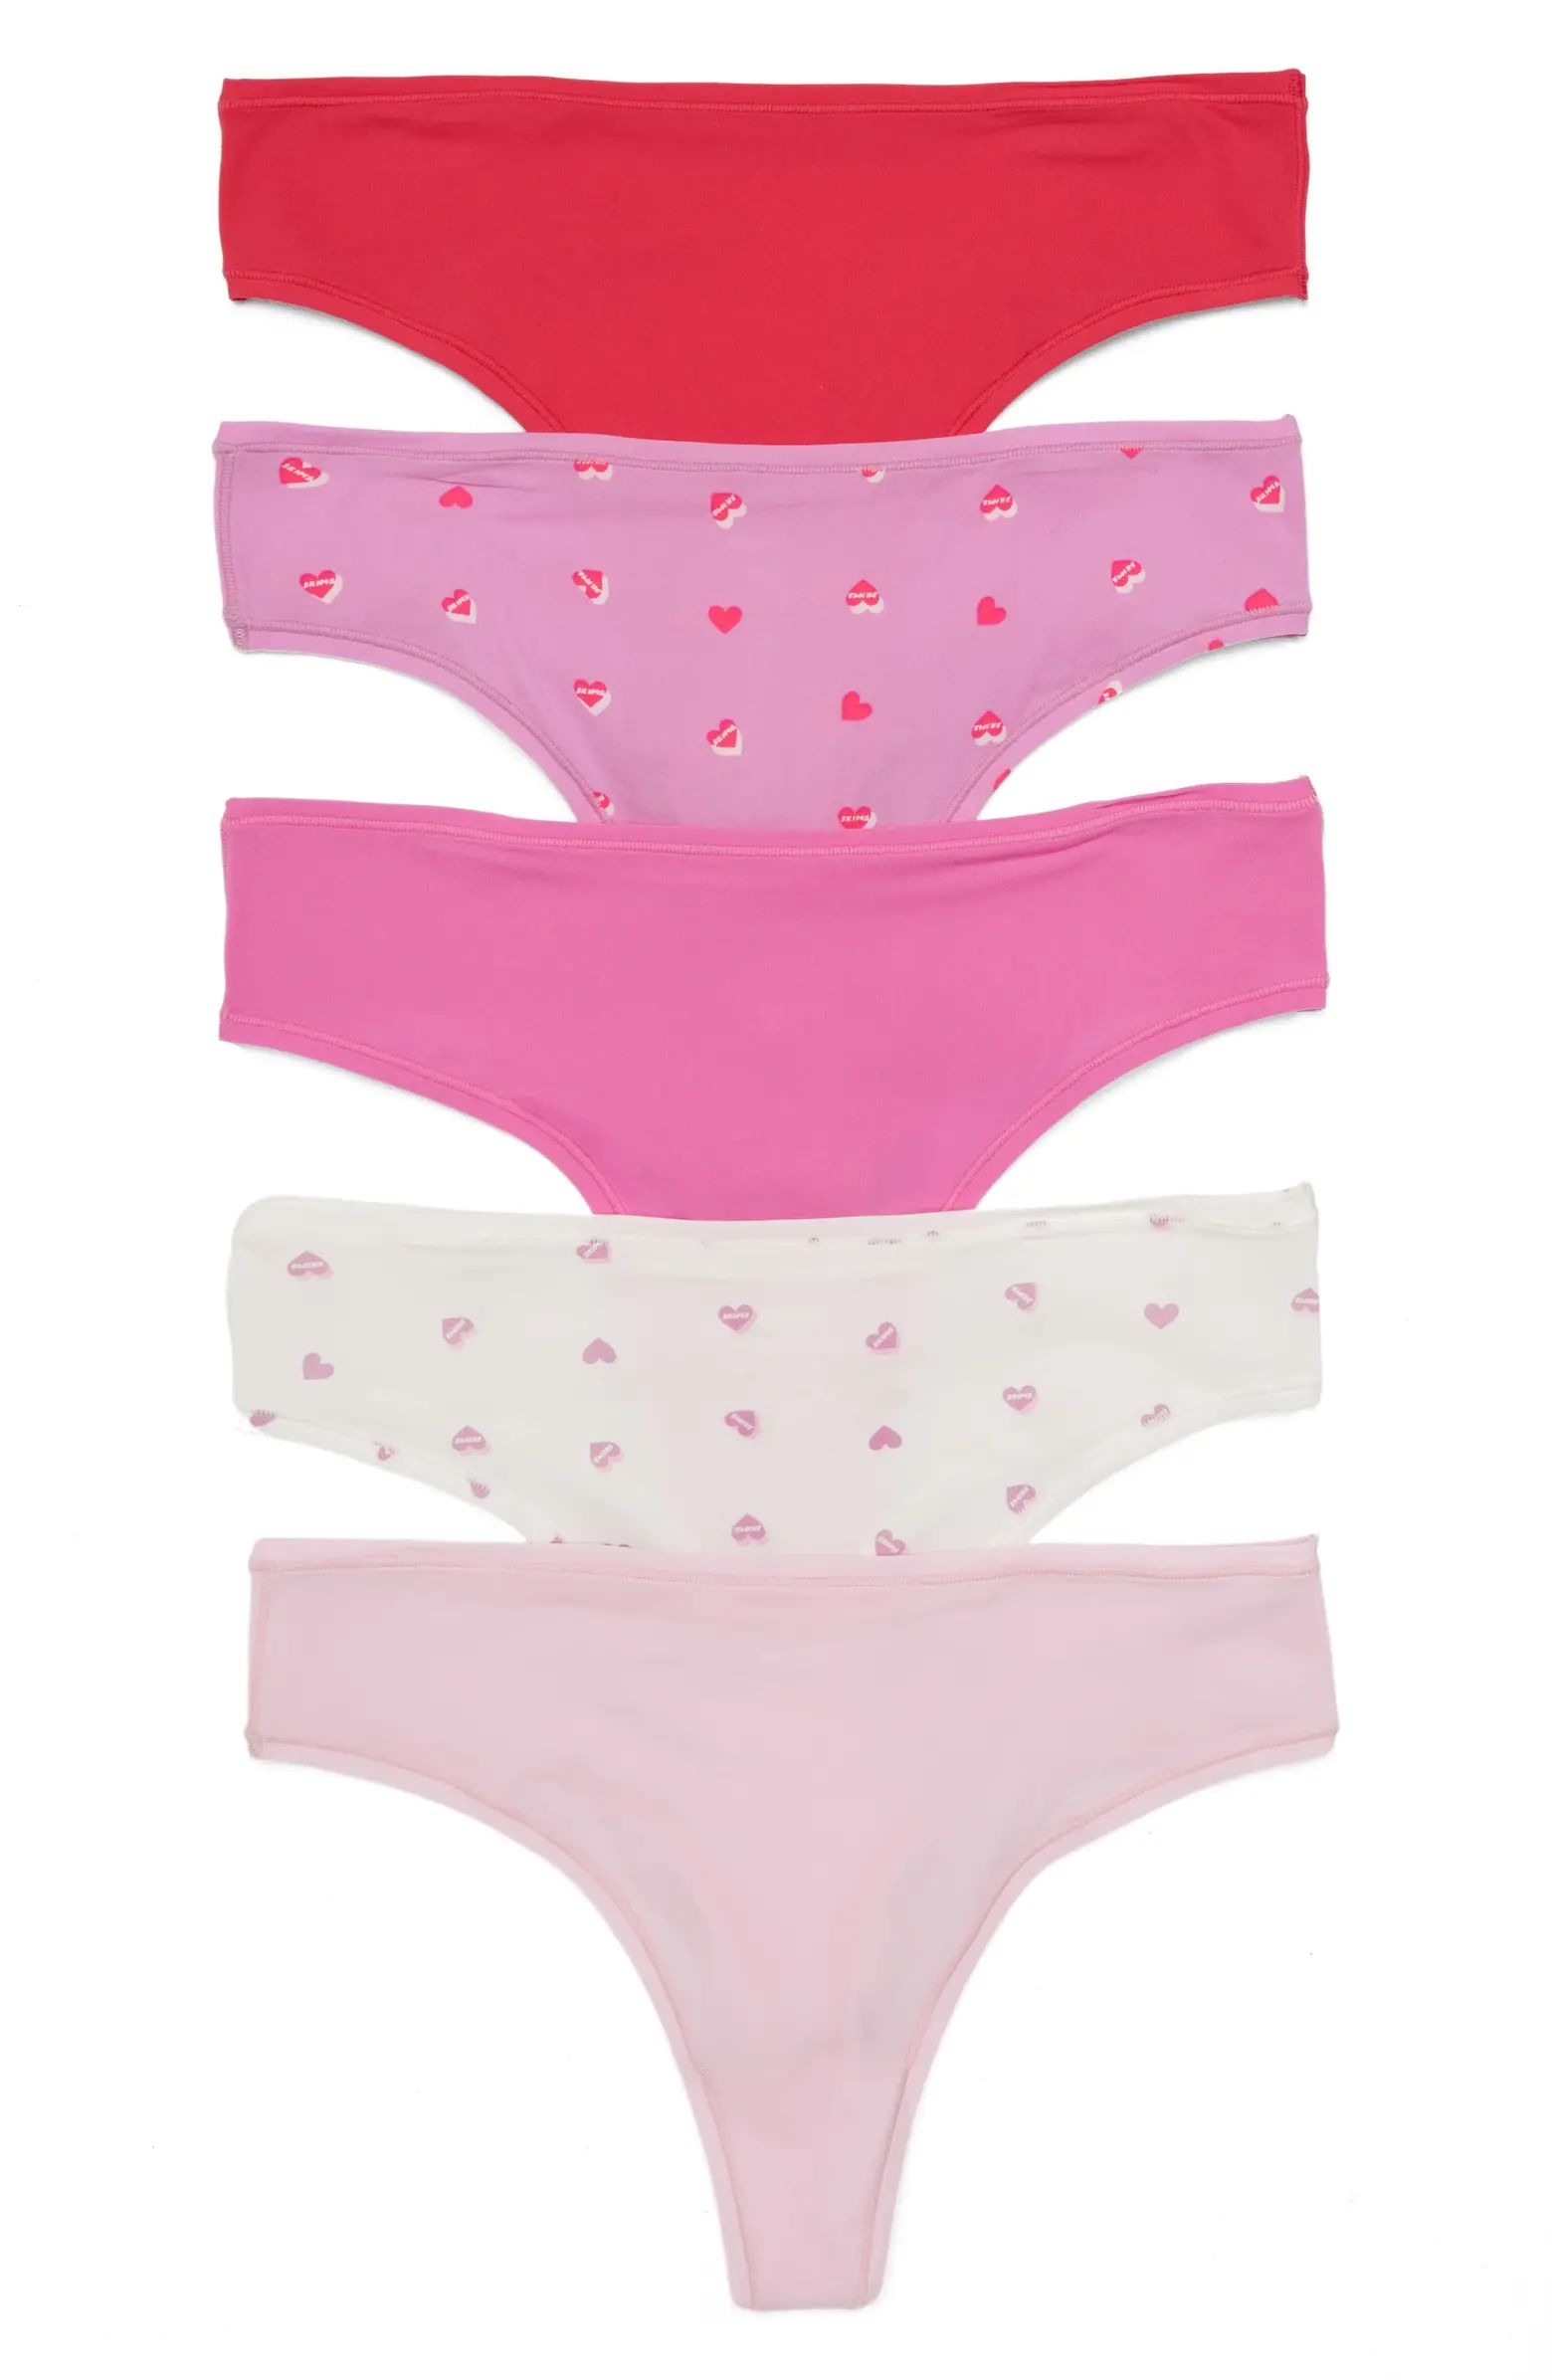 SKIMS Fits Everybody Assorted 5-Pack Thongs | Nordstrom | Nordstrom